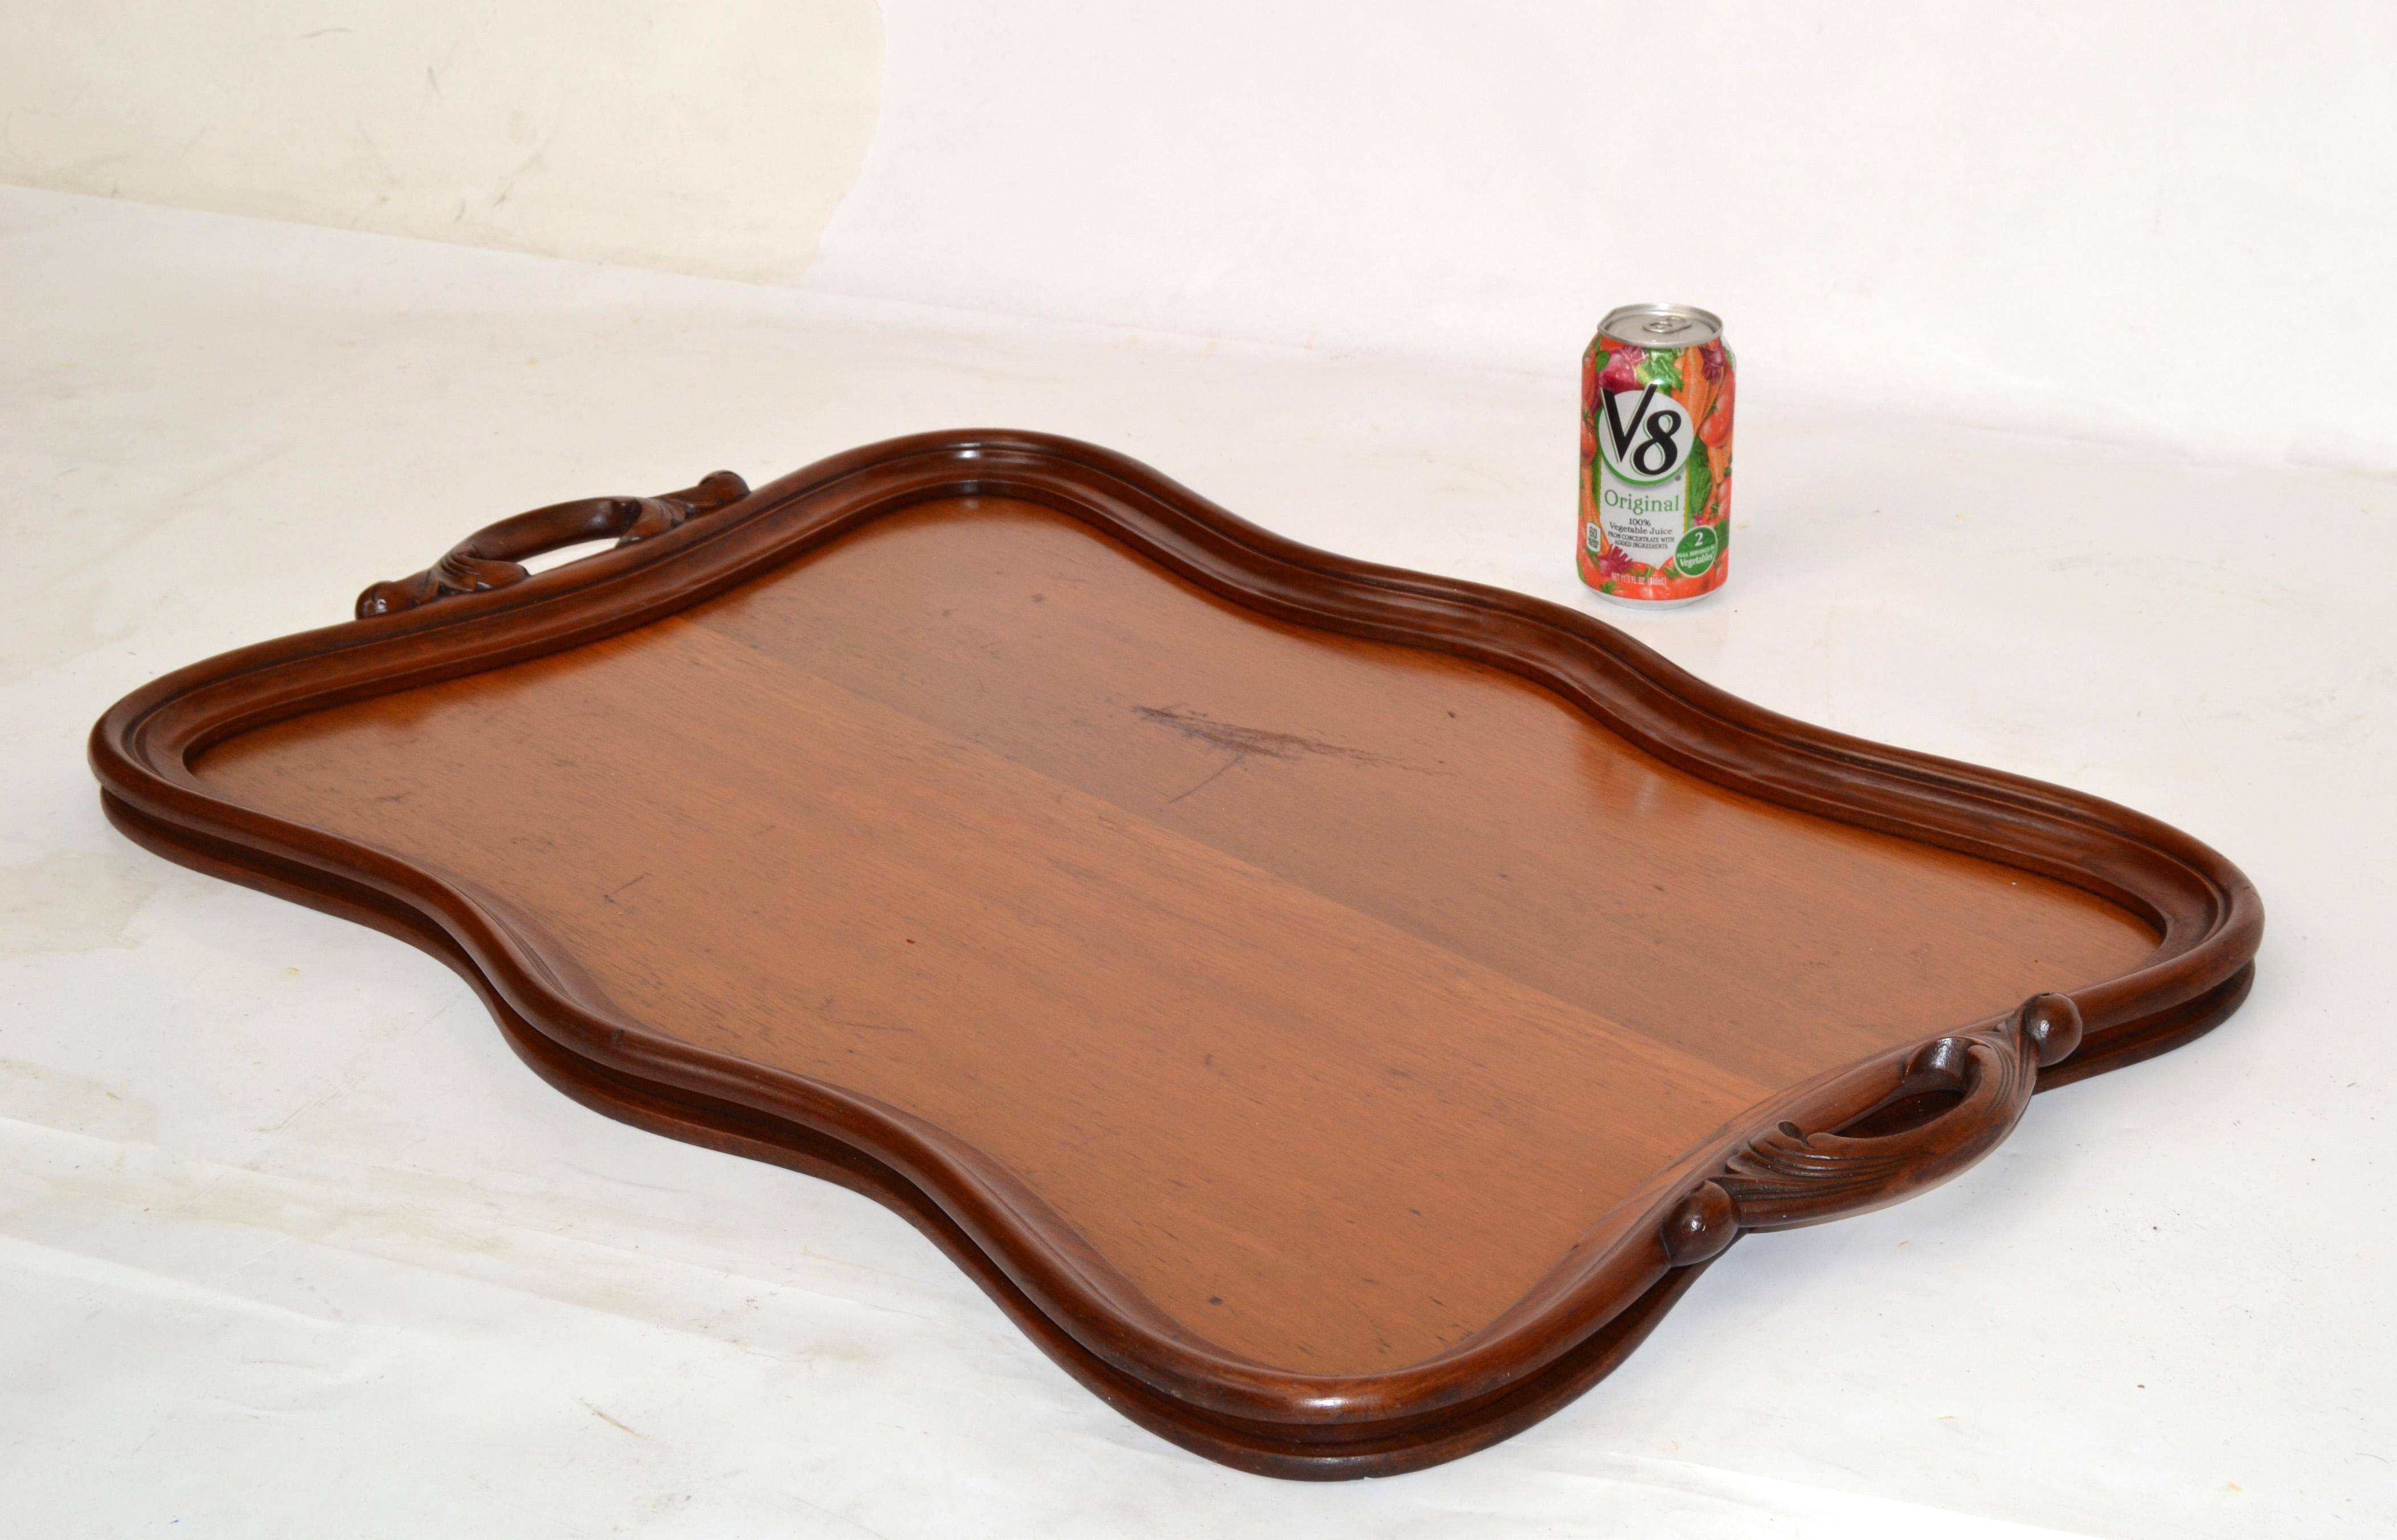 Hollywood Regency large rustic Serving Tray, Platter, Barware hand-carved out of solid wood.
Easy to carry due to the two handles and note the details.
Made in America in the late 20th century.
In original condition with some scratches due to